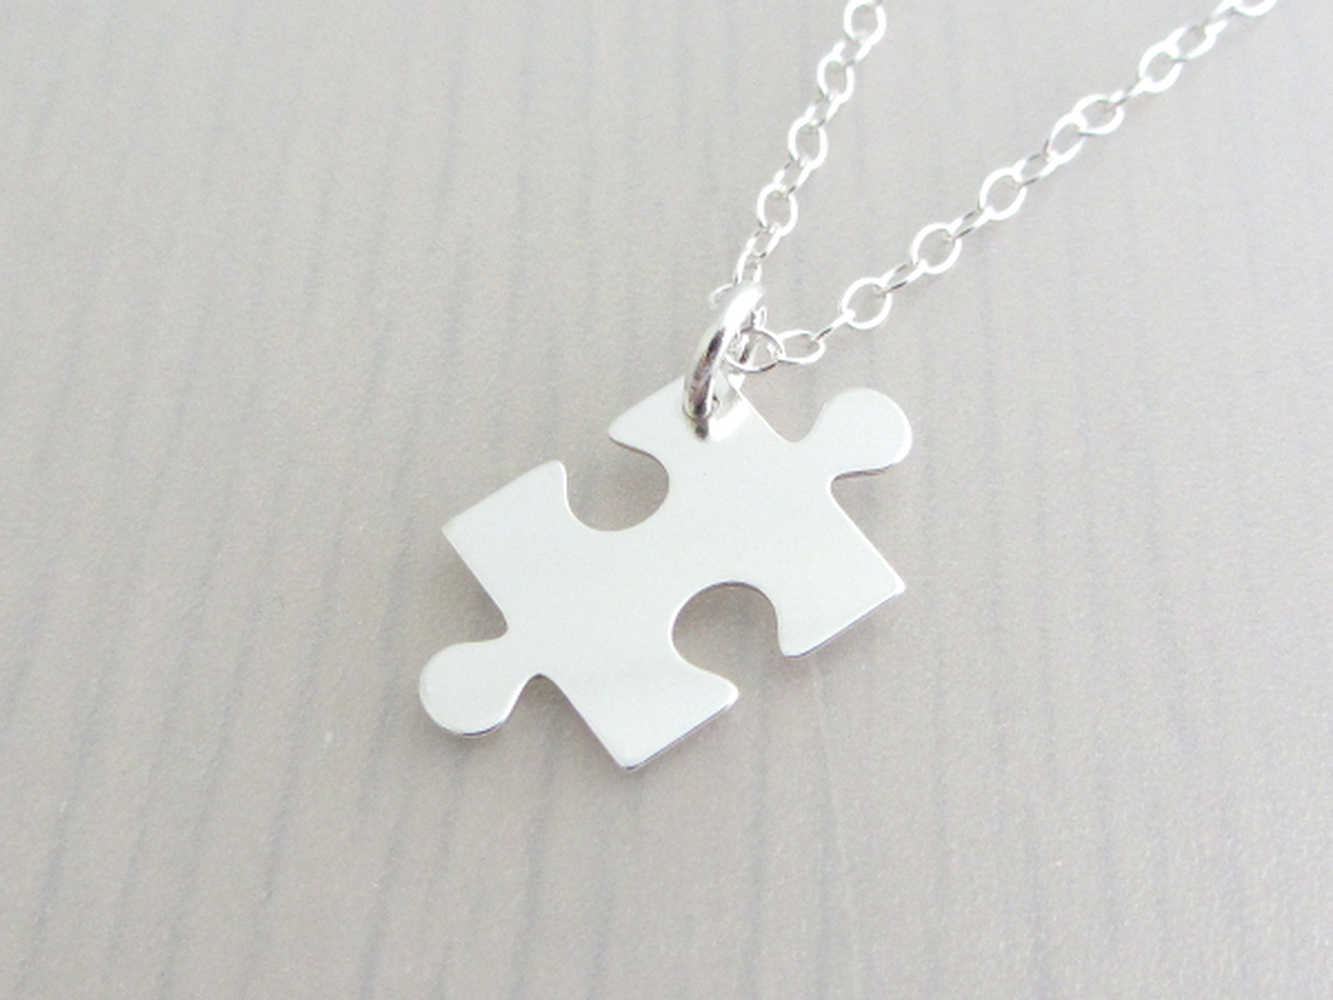 silver jigsaw puzzle piece charm on a silver chain